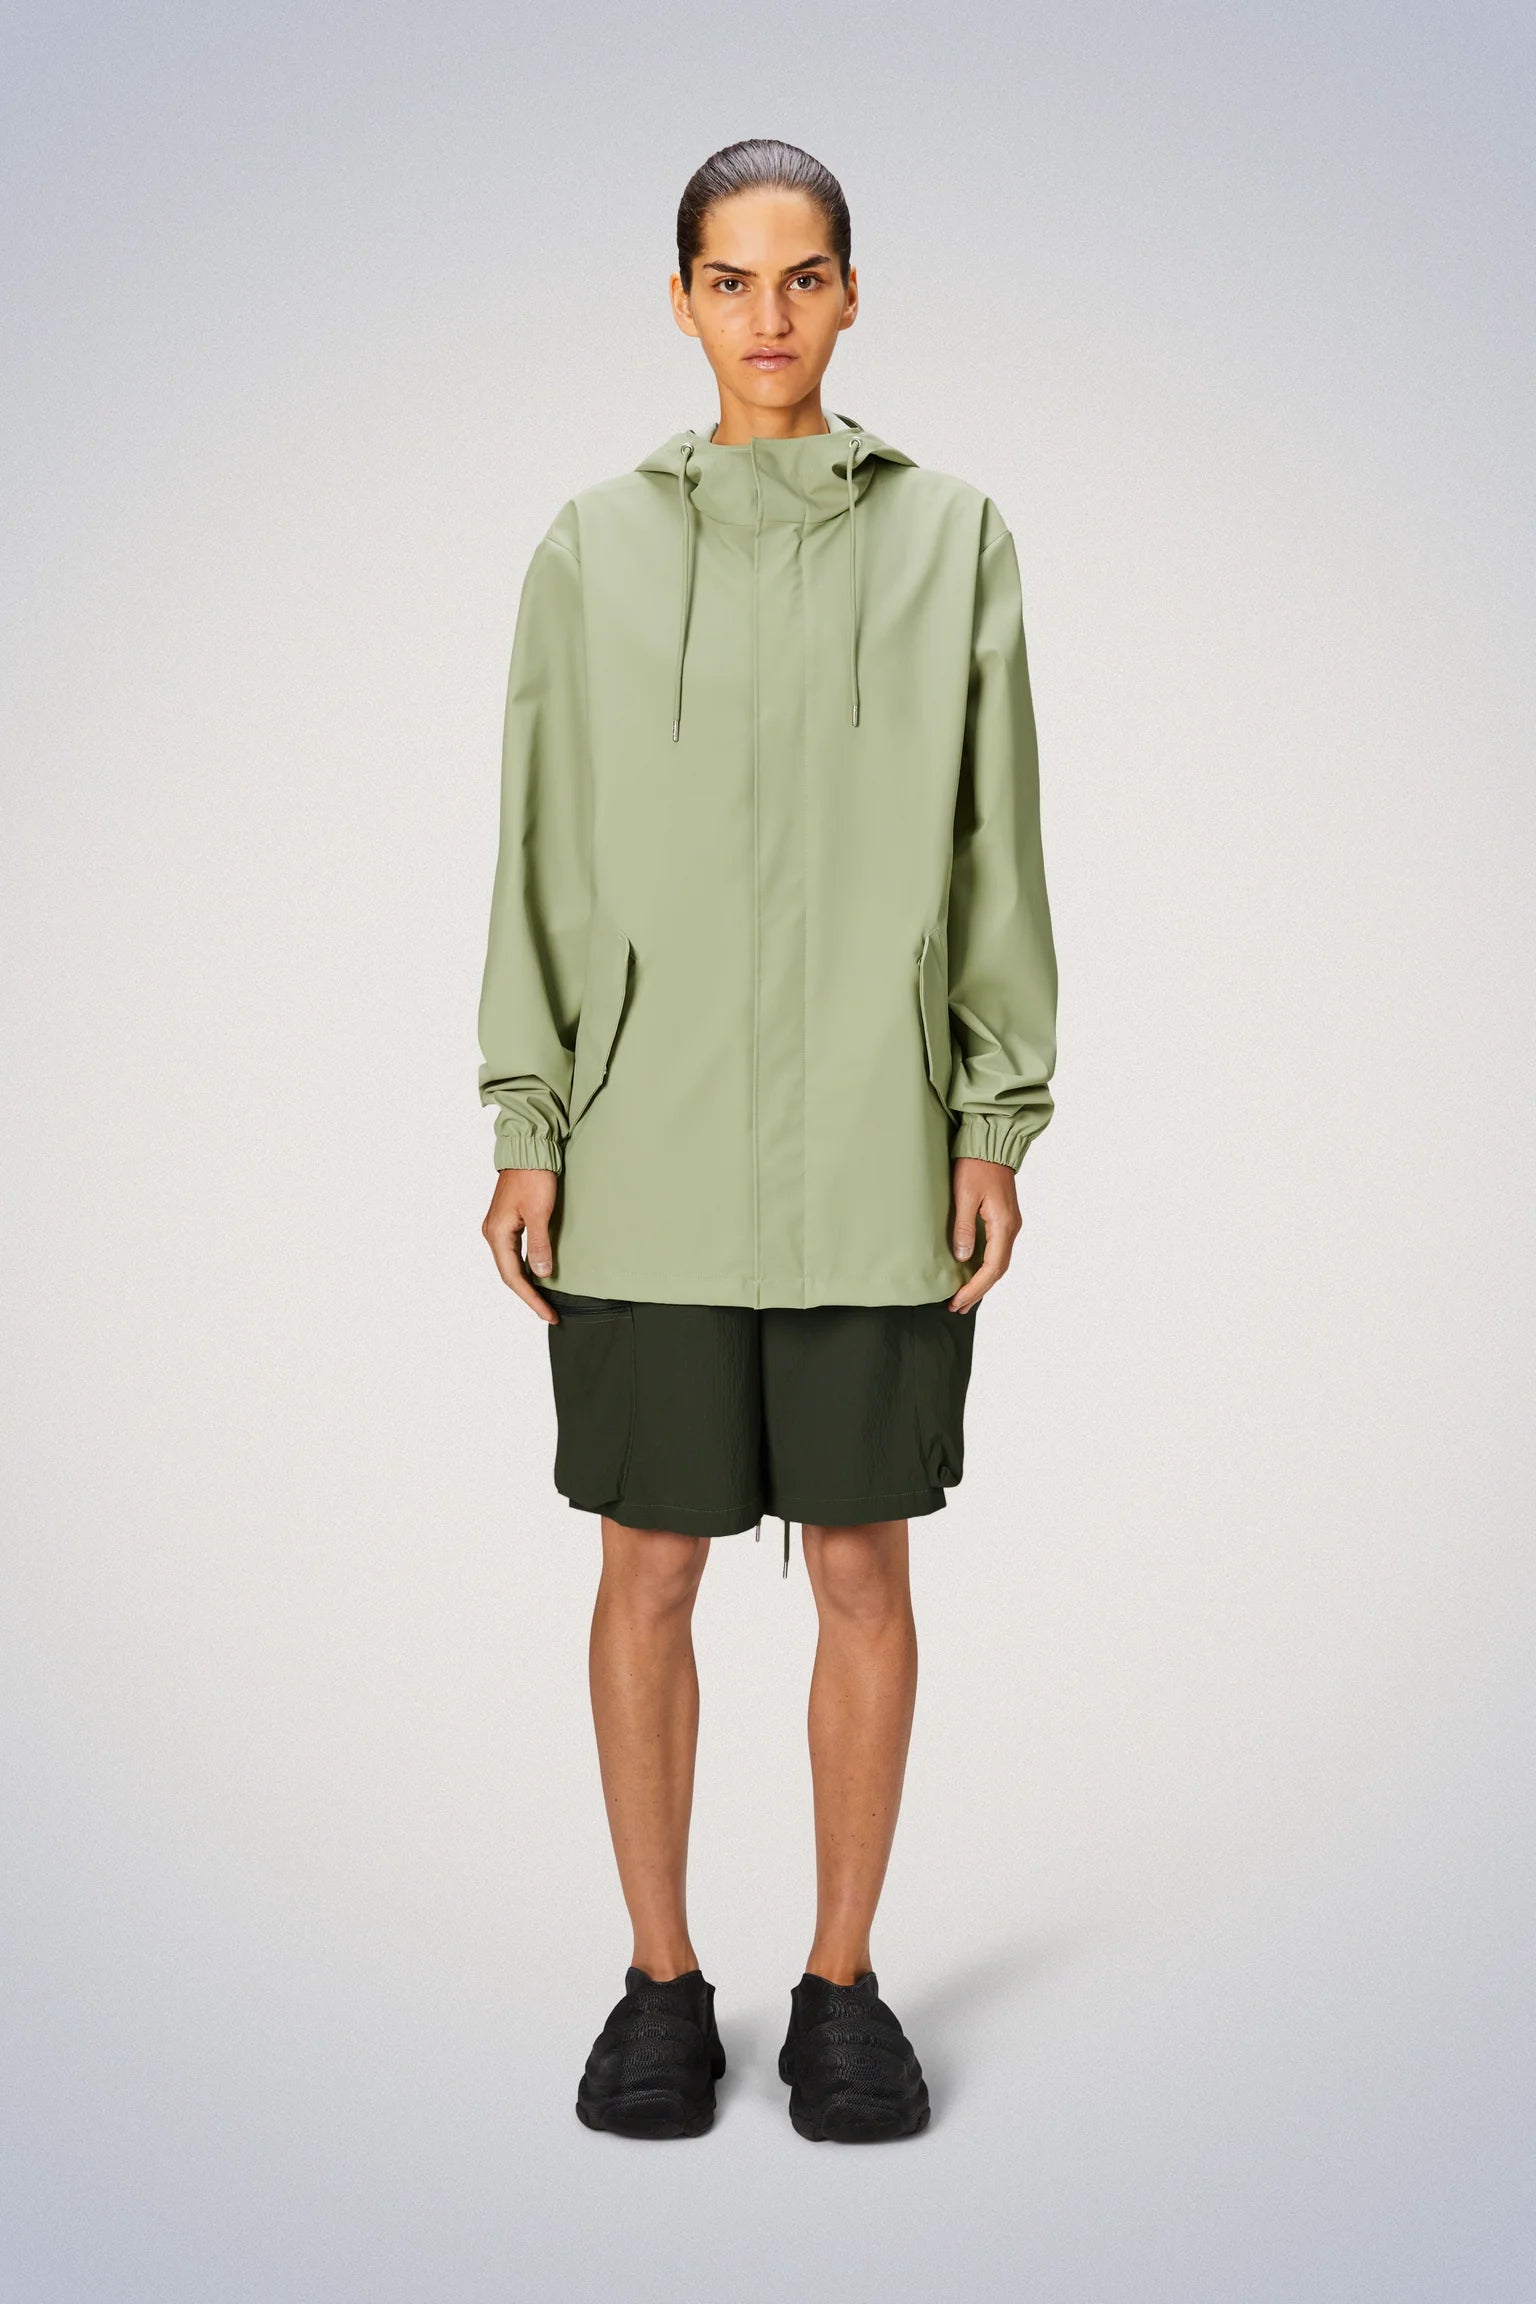 A man donning a Rains Fishtail Jacket in a vivid shade of green, exuding a pared-back aesthetic.